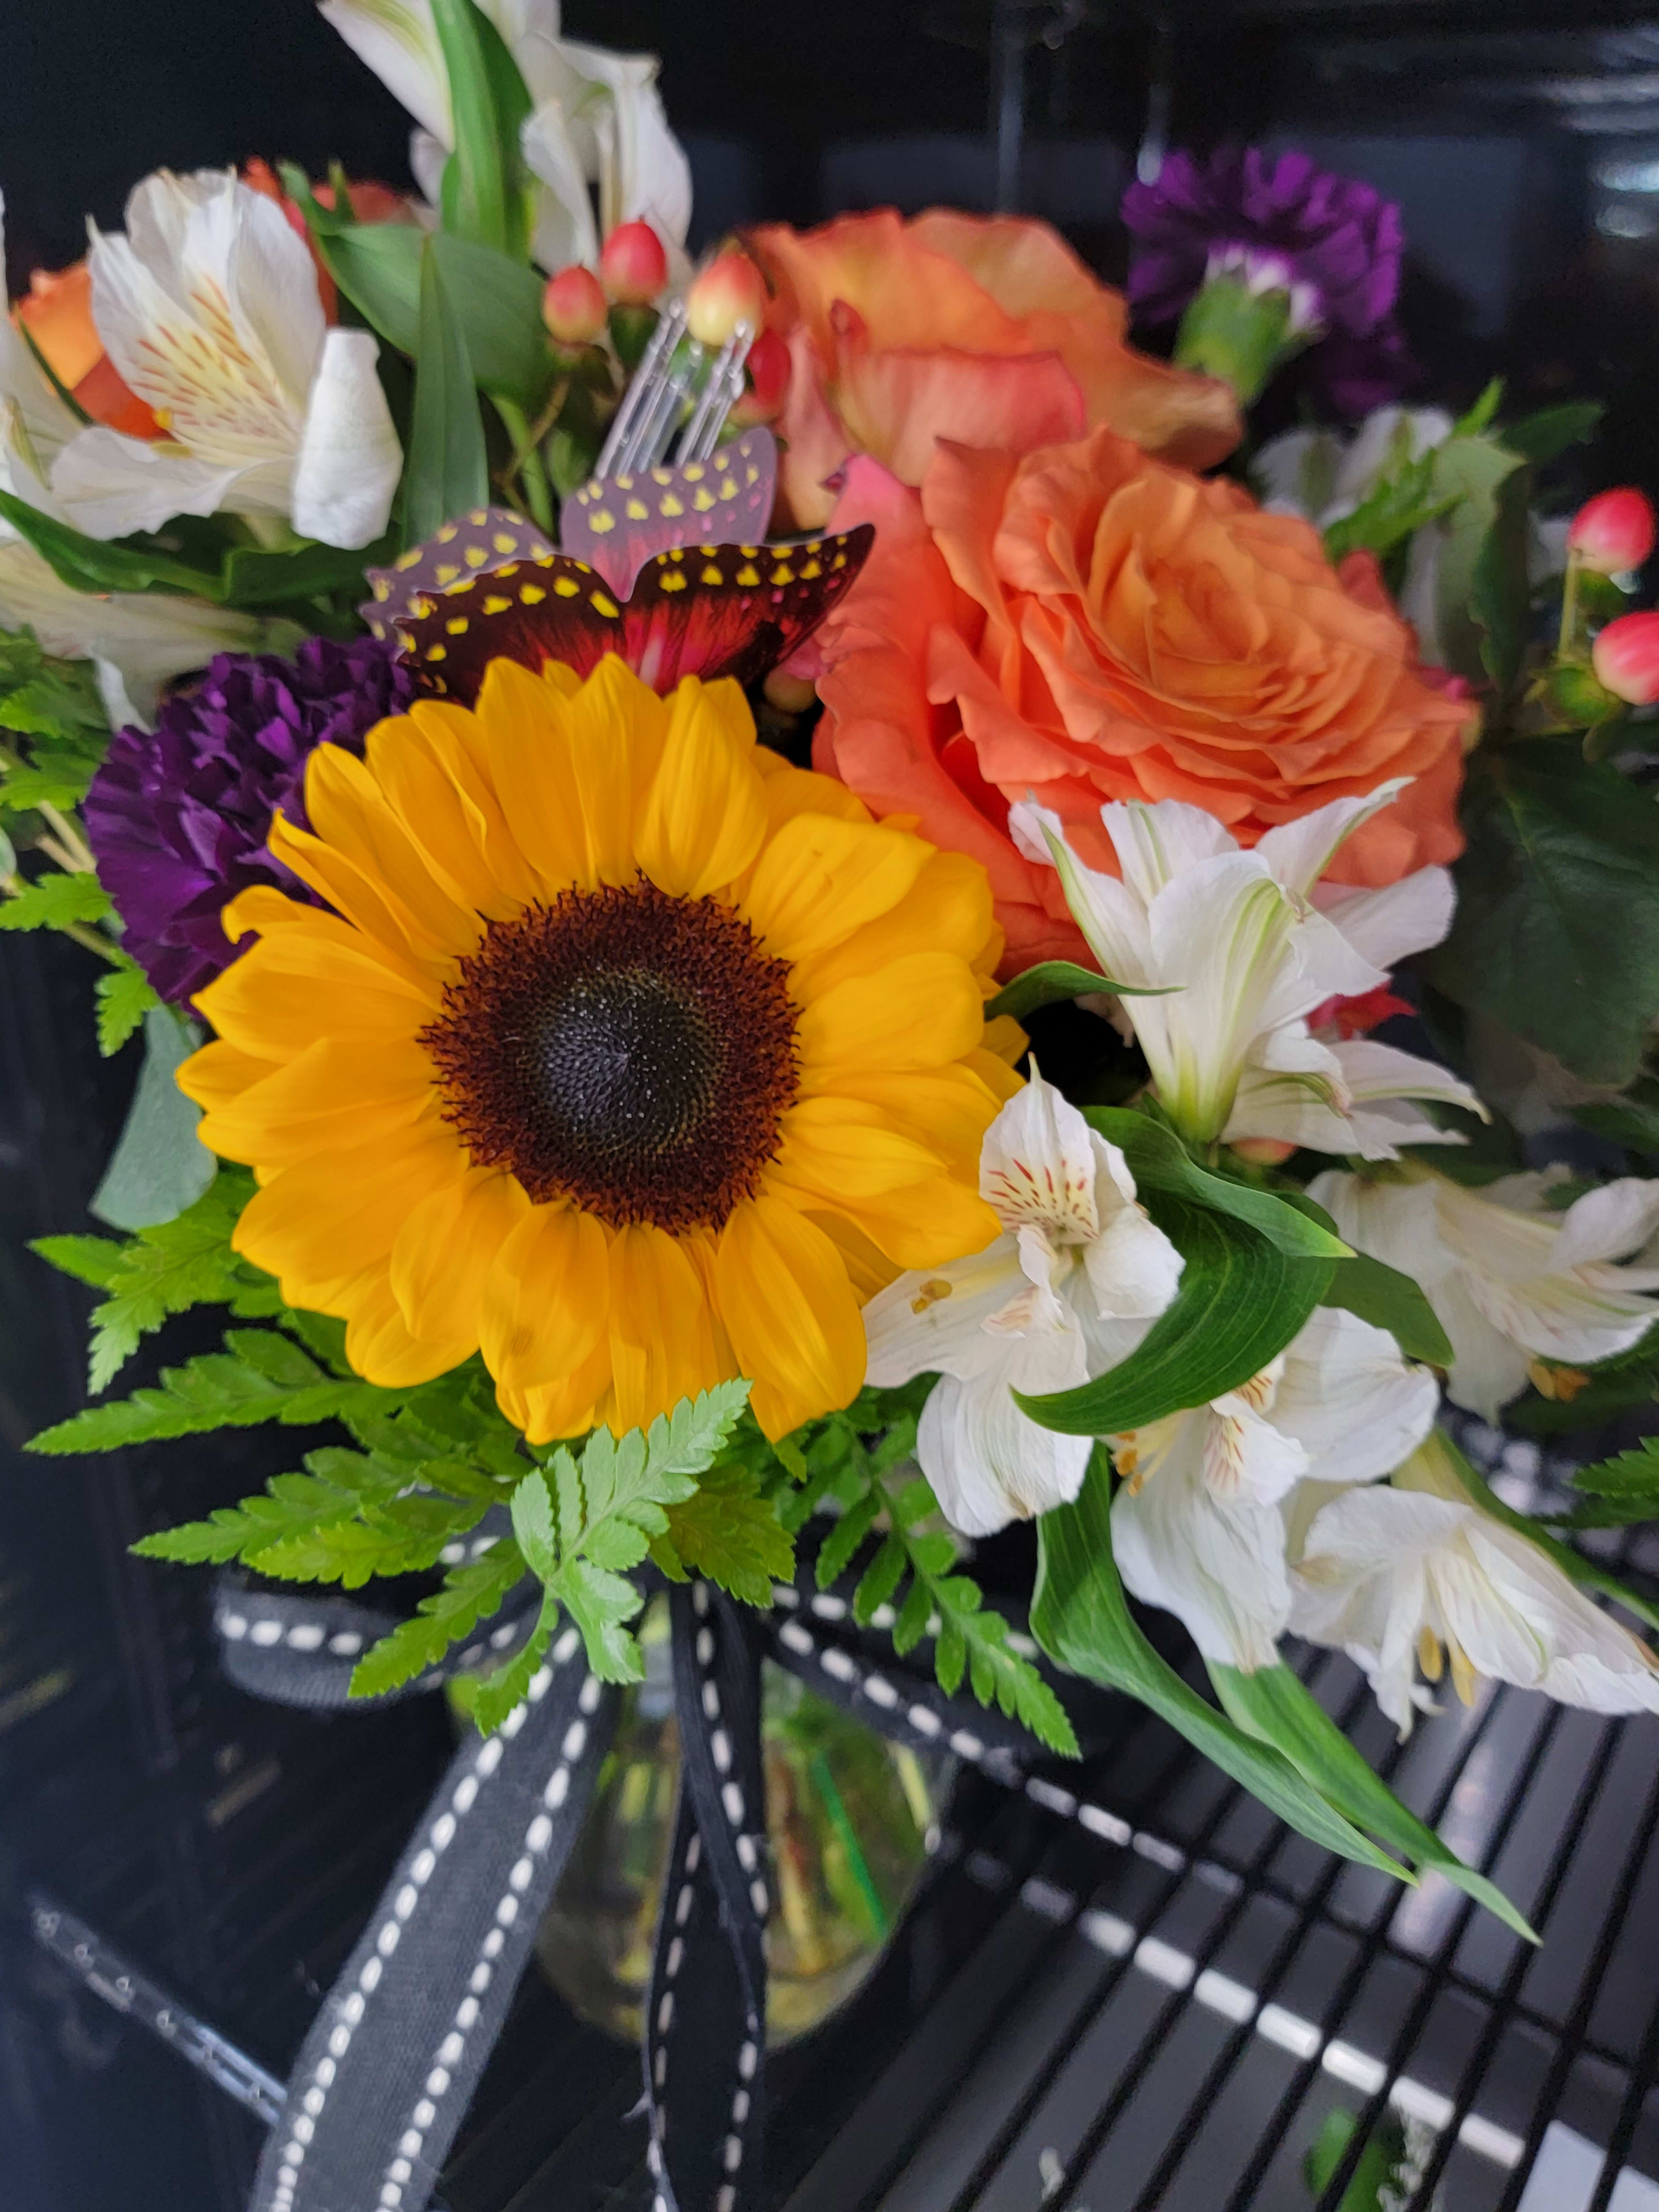 Spirited Sunflower - &quot;Spirited Sunflower&quot; is an enchanting bouquet full of texture, color and fragrance.   Carefully designed by our expert florist with special care  for a long-lasting arrangement.  